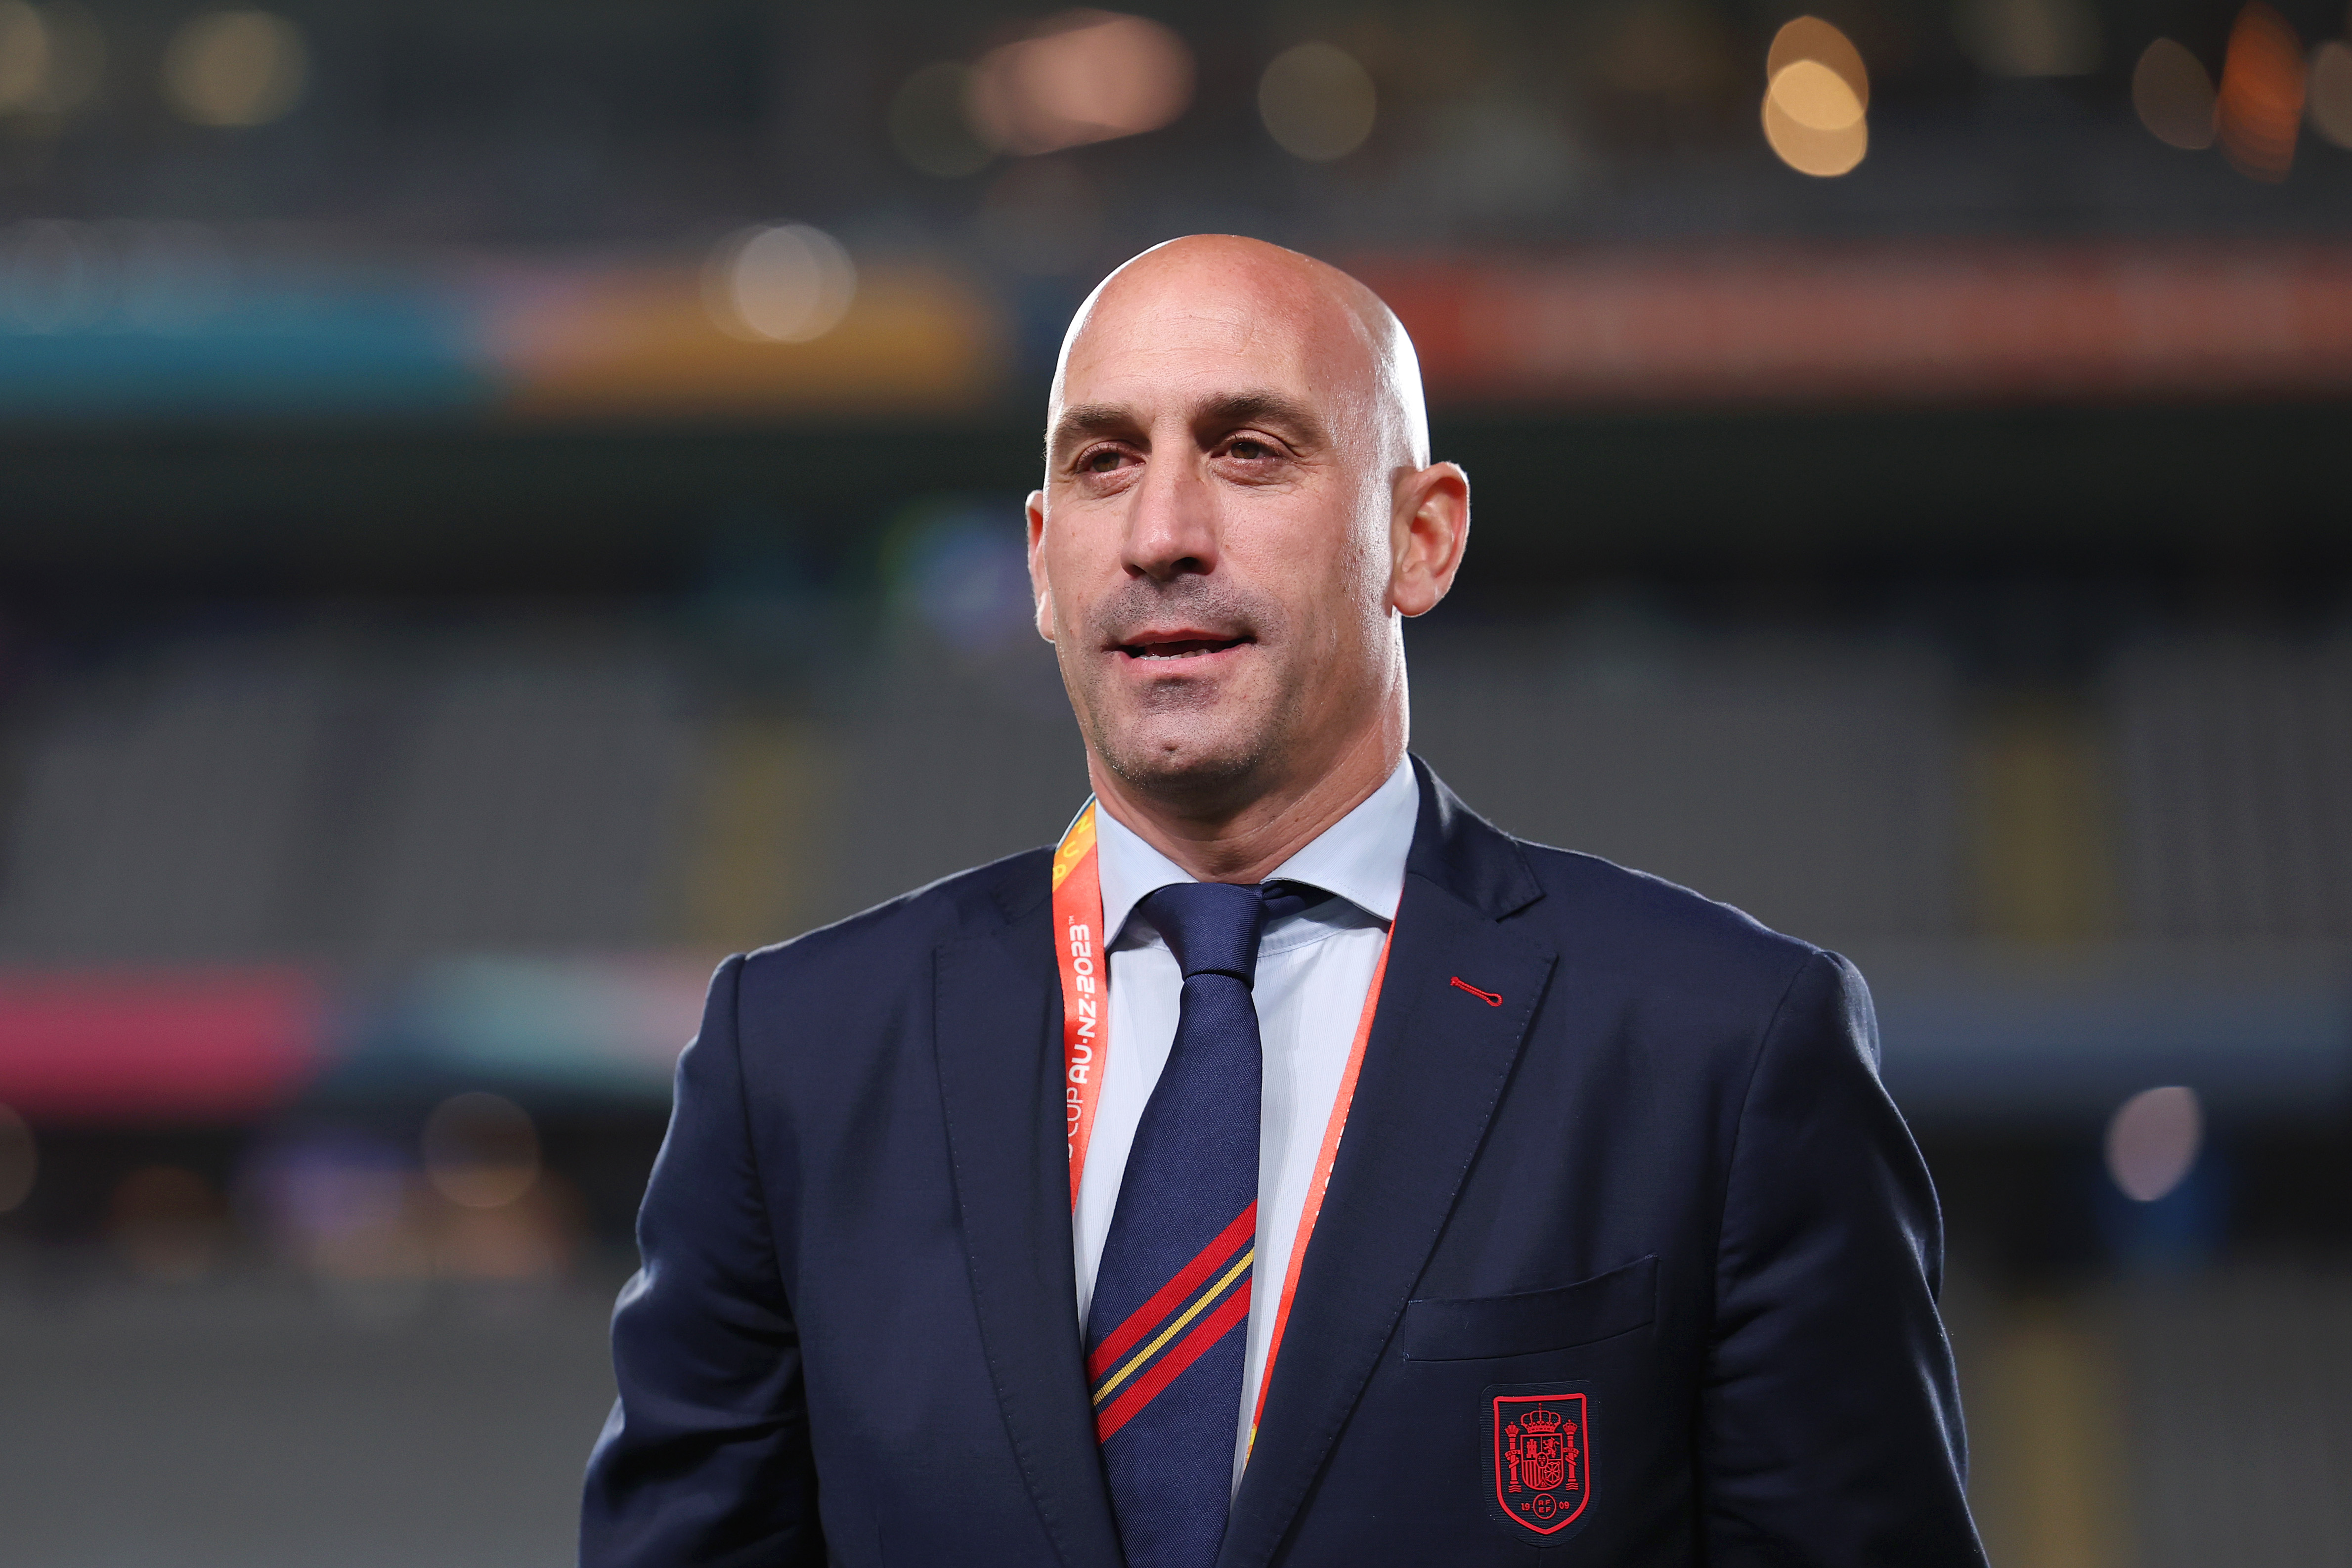 Disgraced Head of Spanish Soccer Luis Rubiales Finally Resigns After World Cup Kiss Scandal